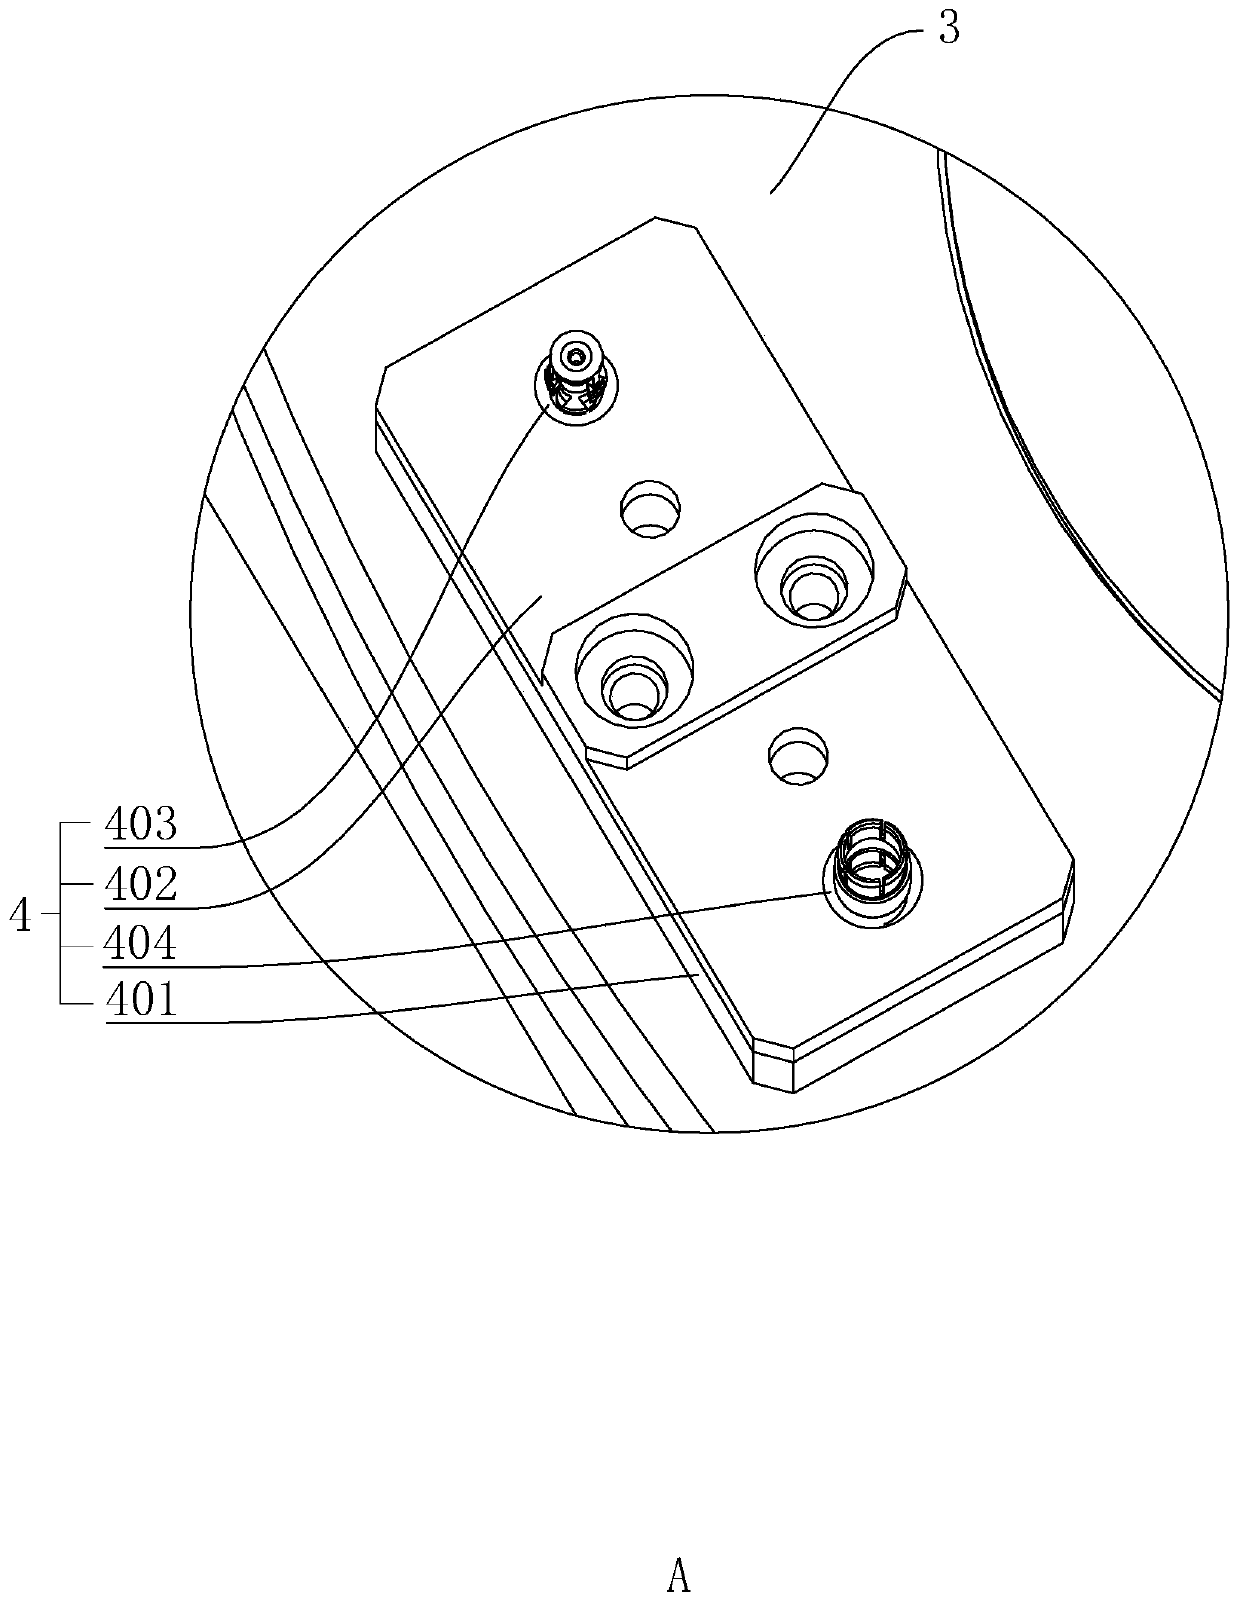 Assembling equipment for coaxial connector